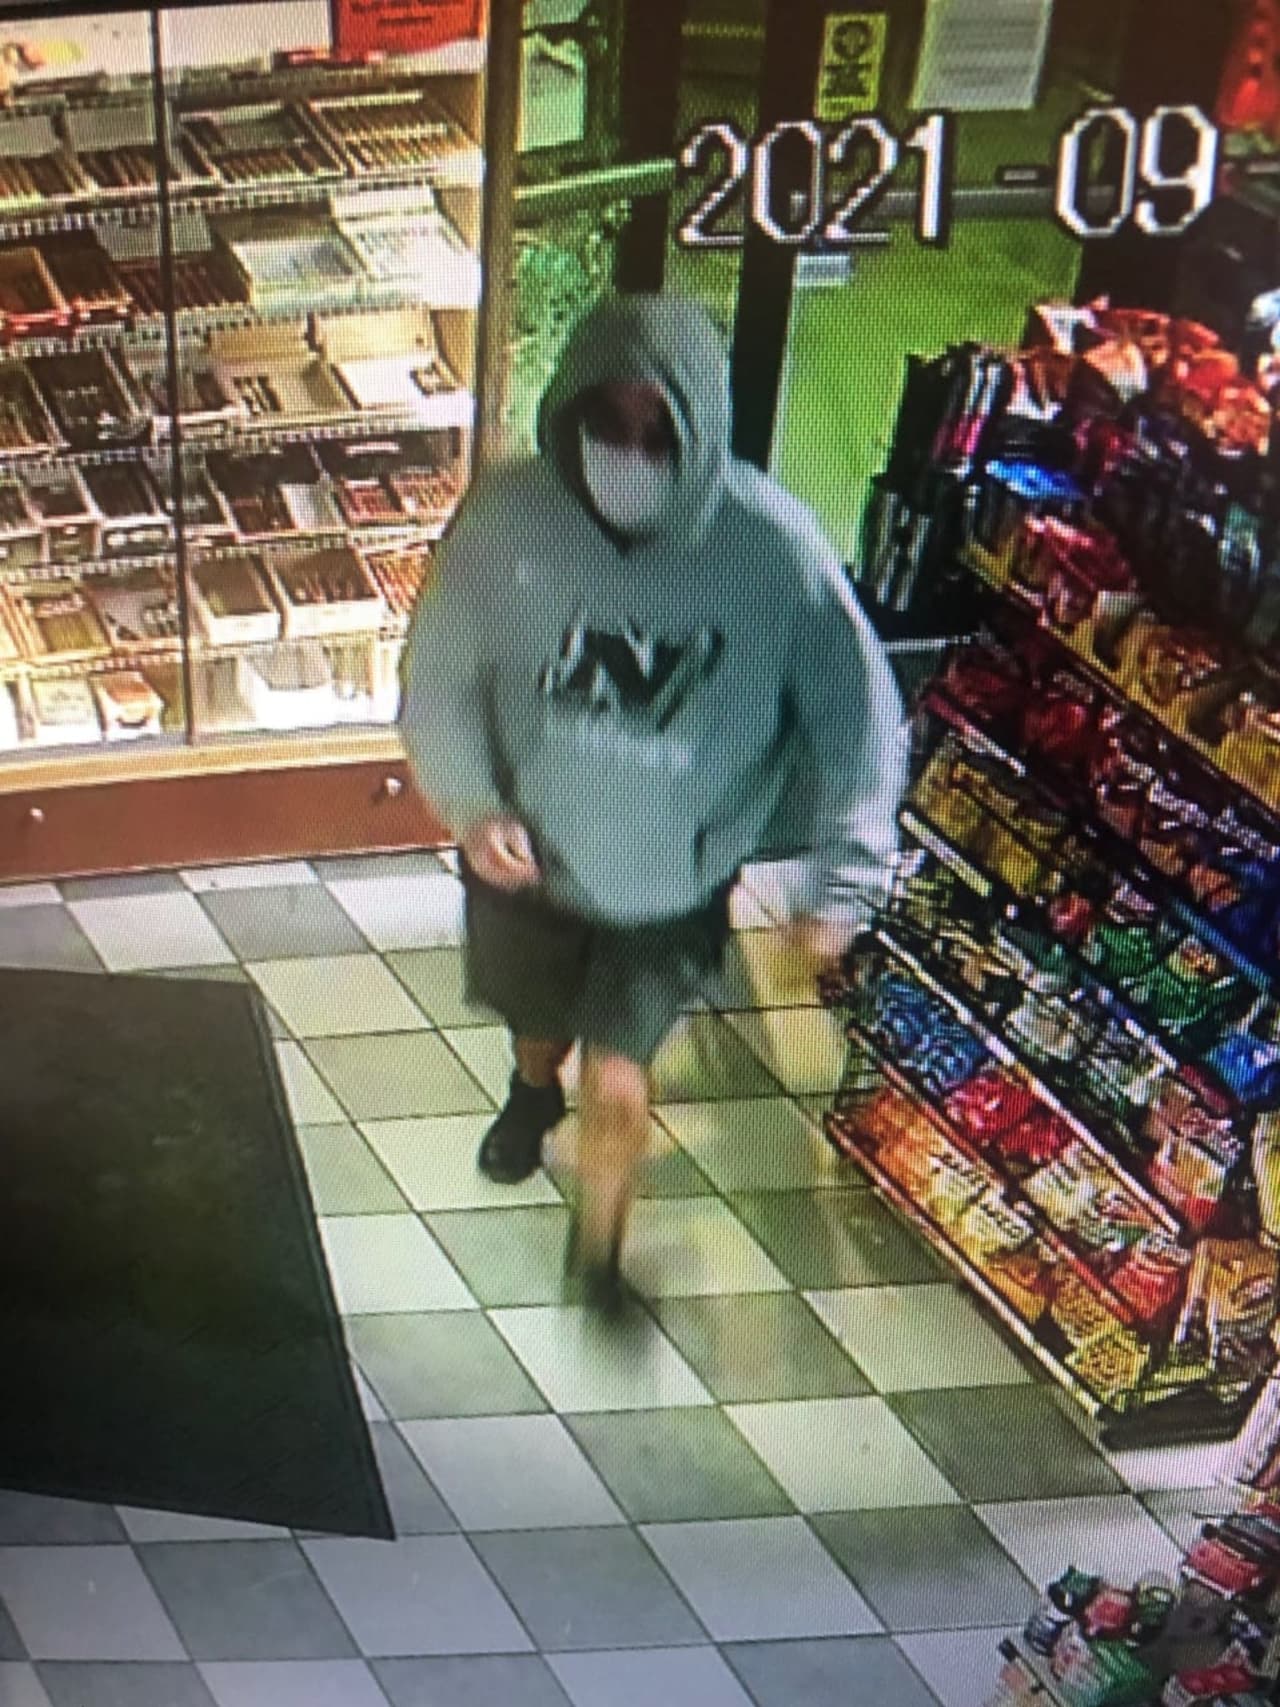 A wanted man was caught on camera after robbing a store in Massachusetts.